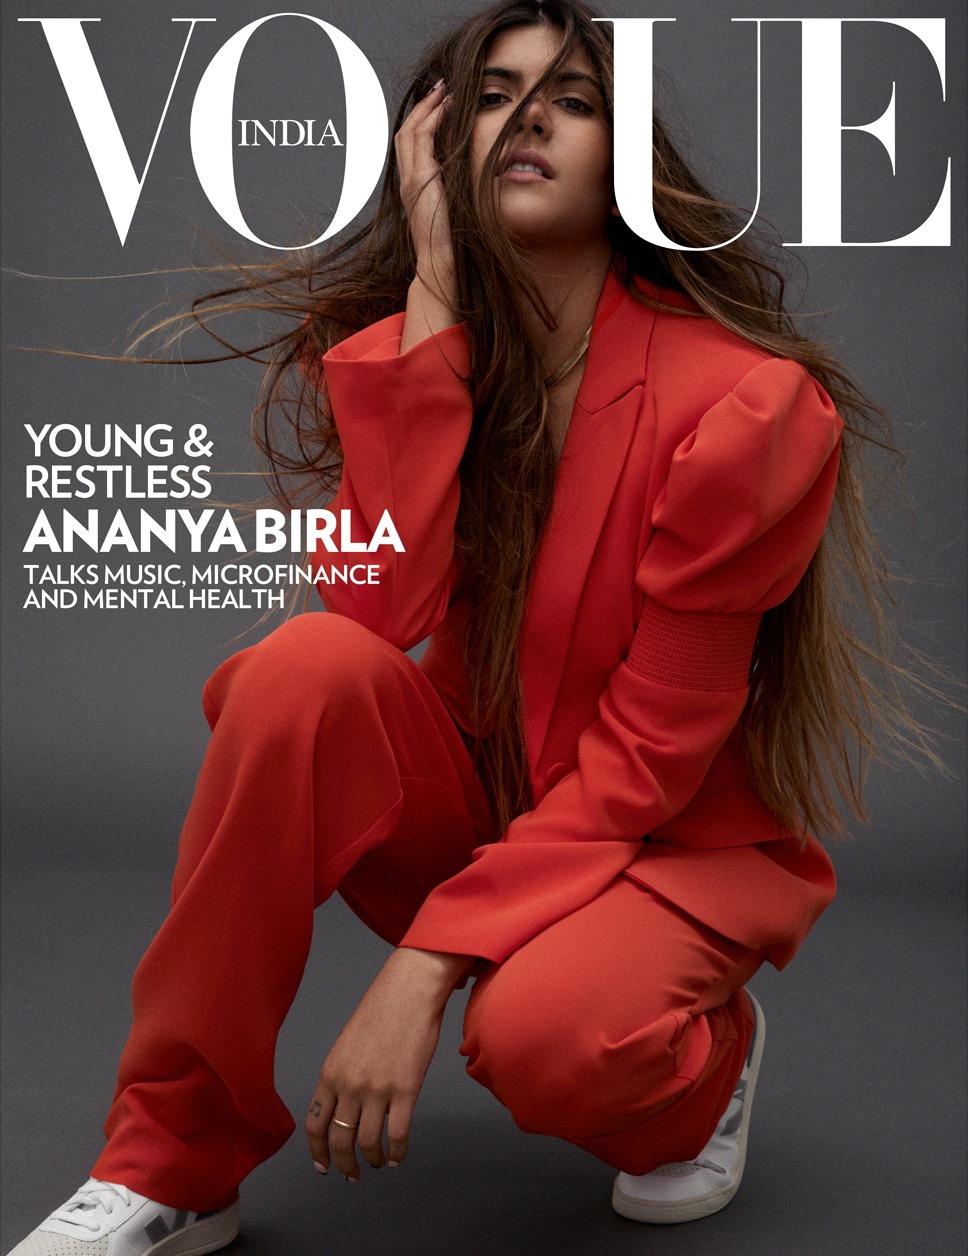 Vogue India: Using Their Influence